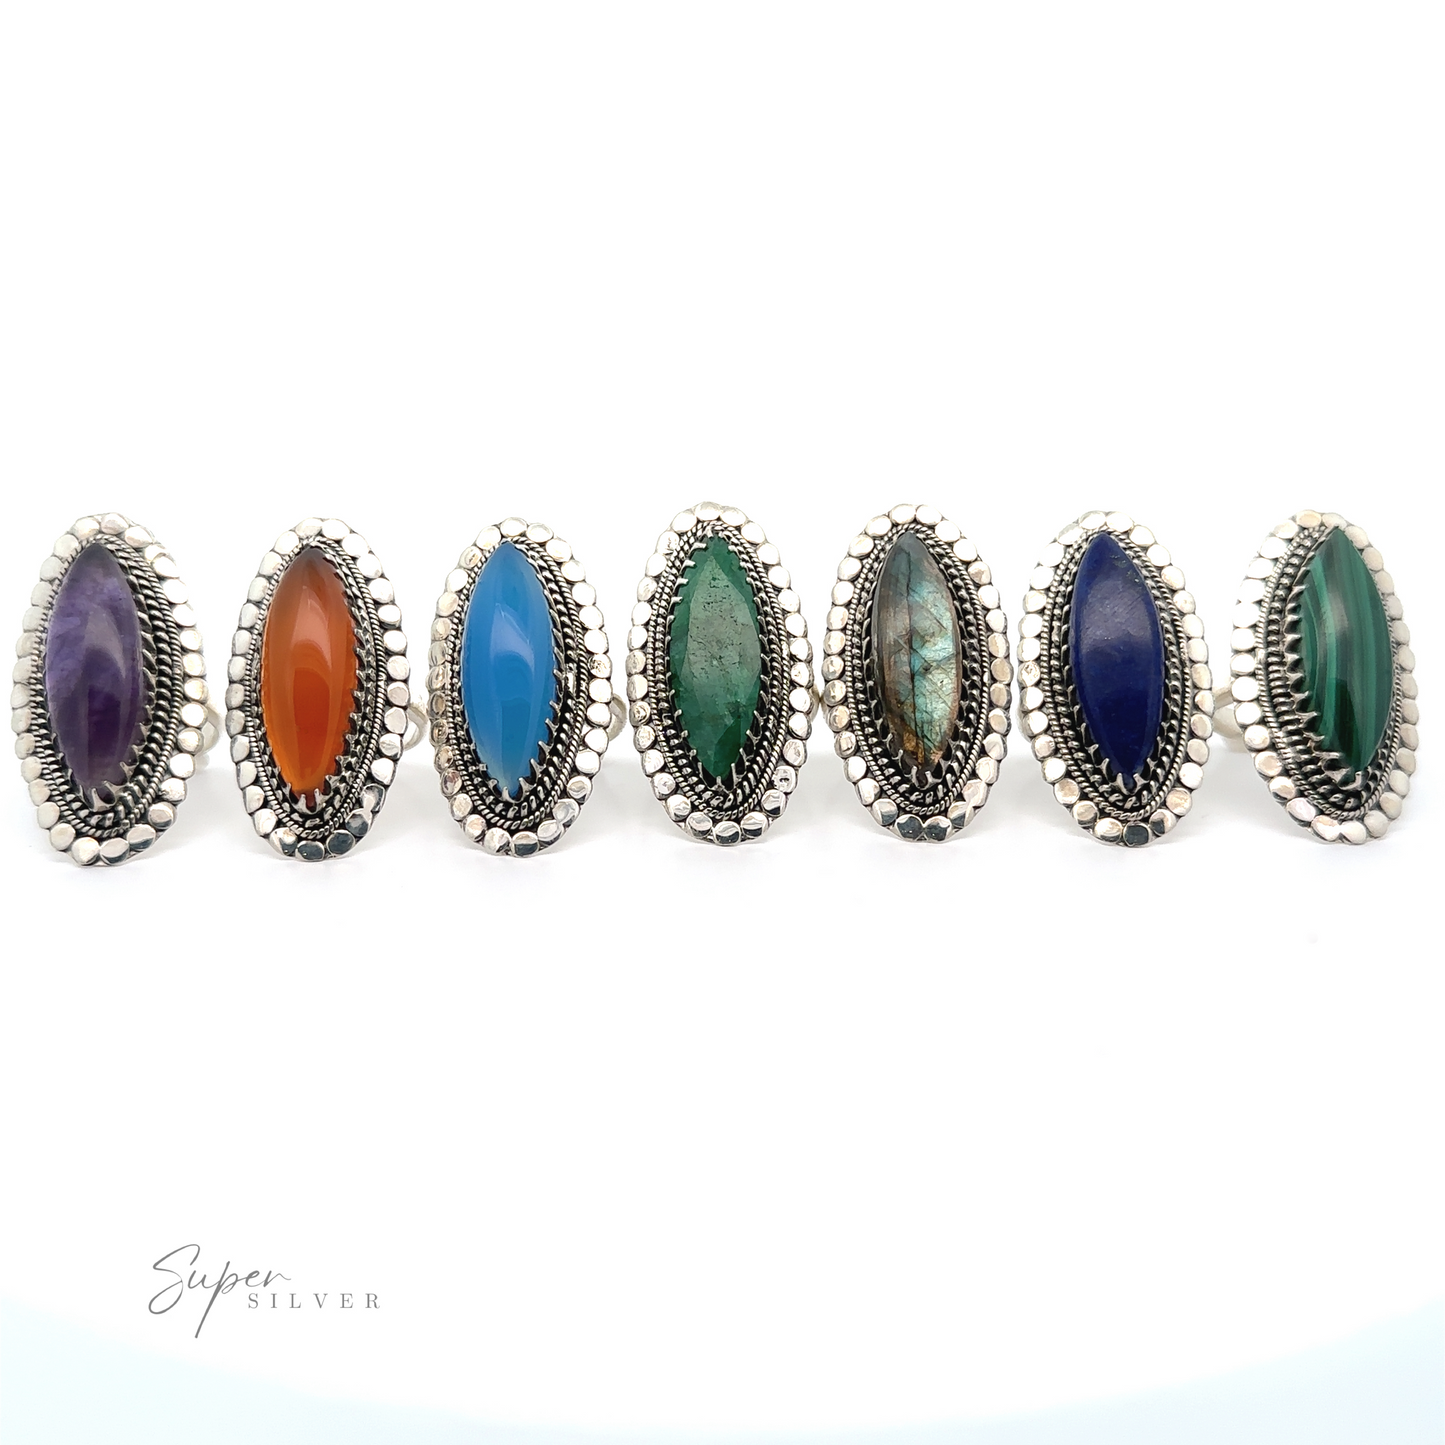 Six silver rings with large gemstones in vibrant shades of purple, orange, blue, turquoise, dark blue, and green are displayed in a row on a white background. Perfect as Statement Marquise Shaped Gemstone Ring pieces, these unique rings are highlighted by "Super Silver" text in the corner.